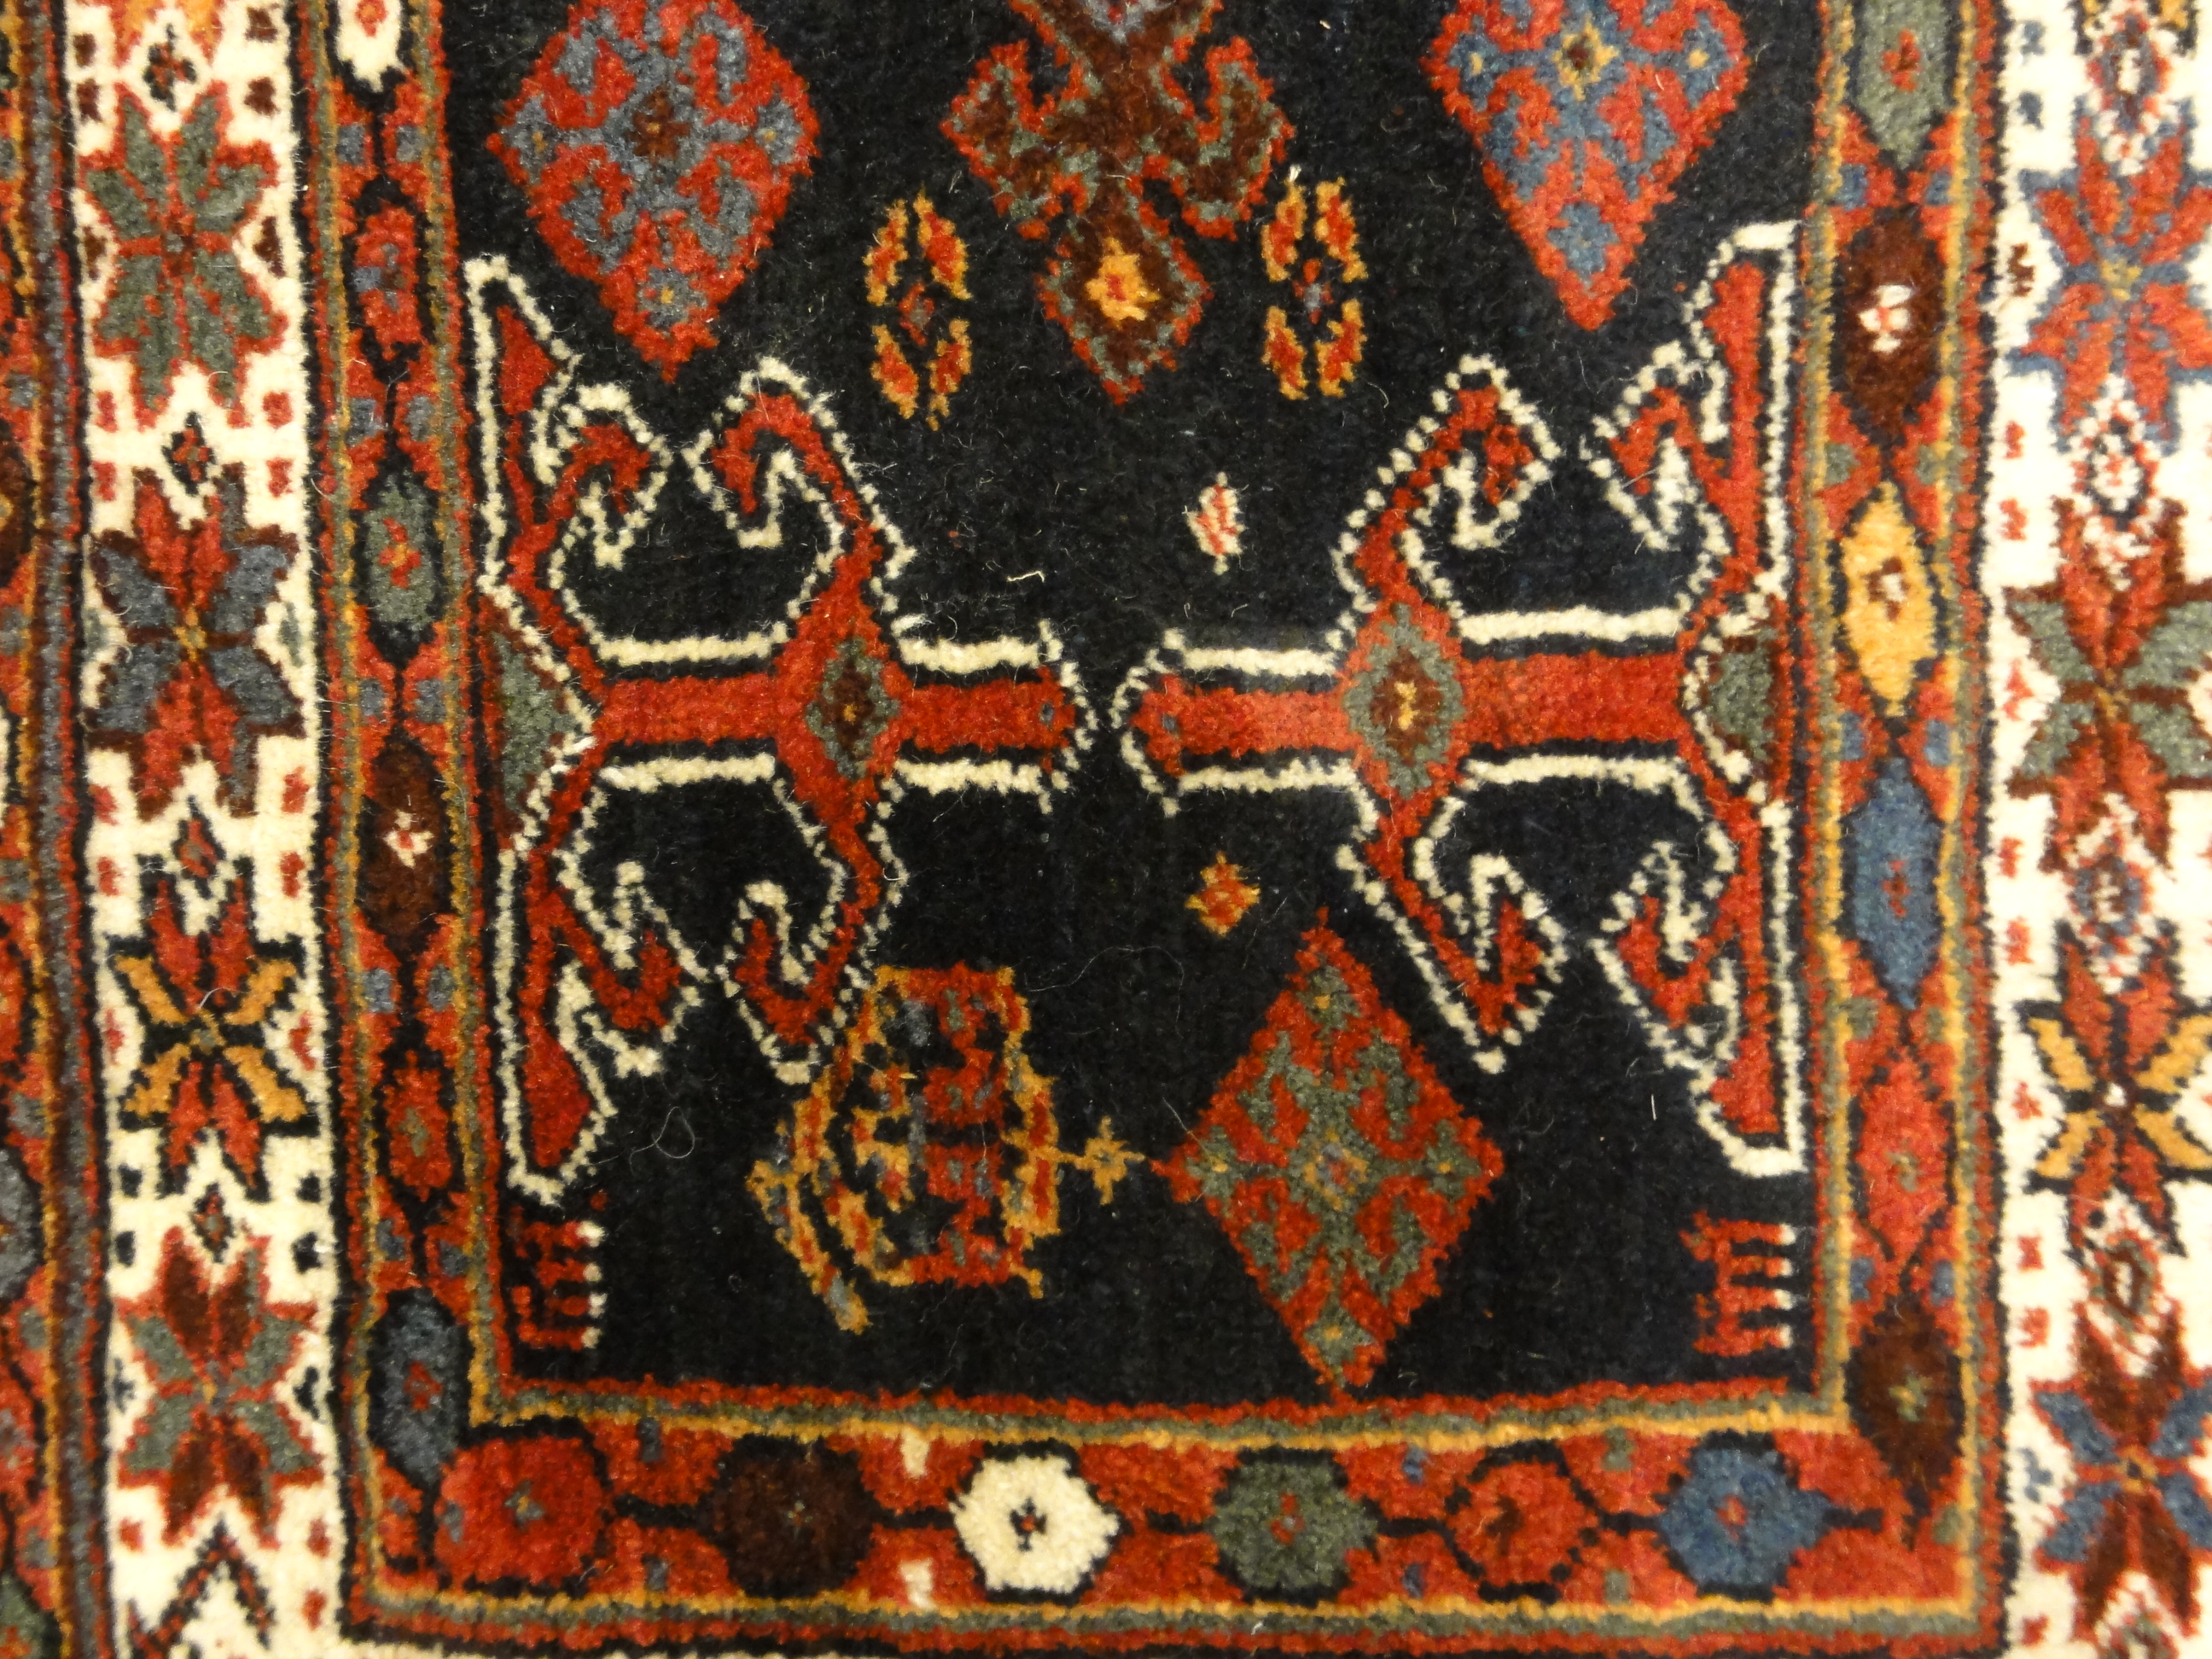 Kurdish Saddle Bag. A piece of genuine authentic antique woven carpet art sold by Santa Barbara Design Center, Rugs and More.